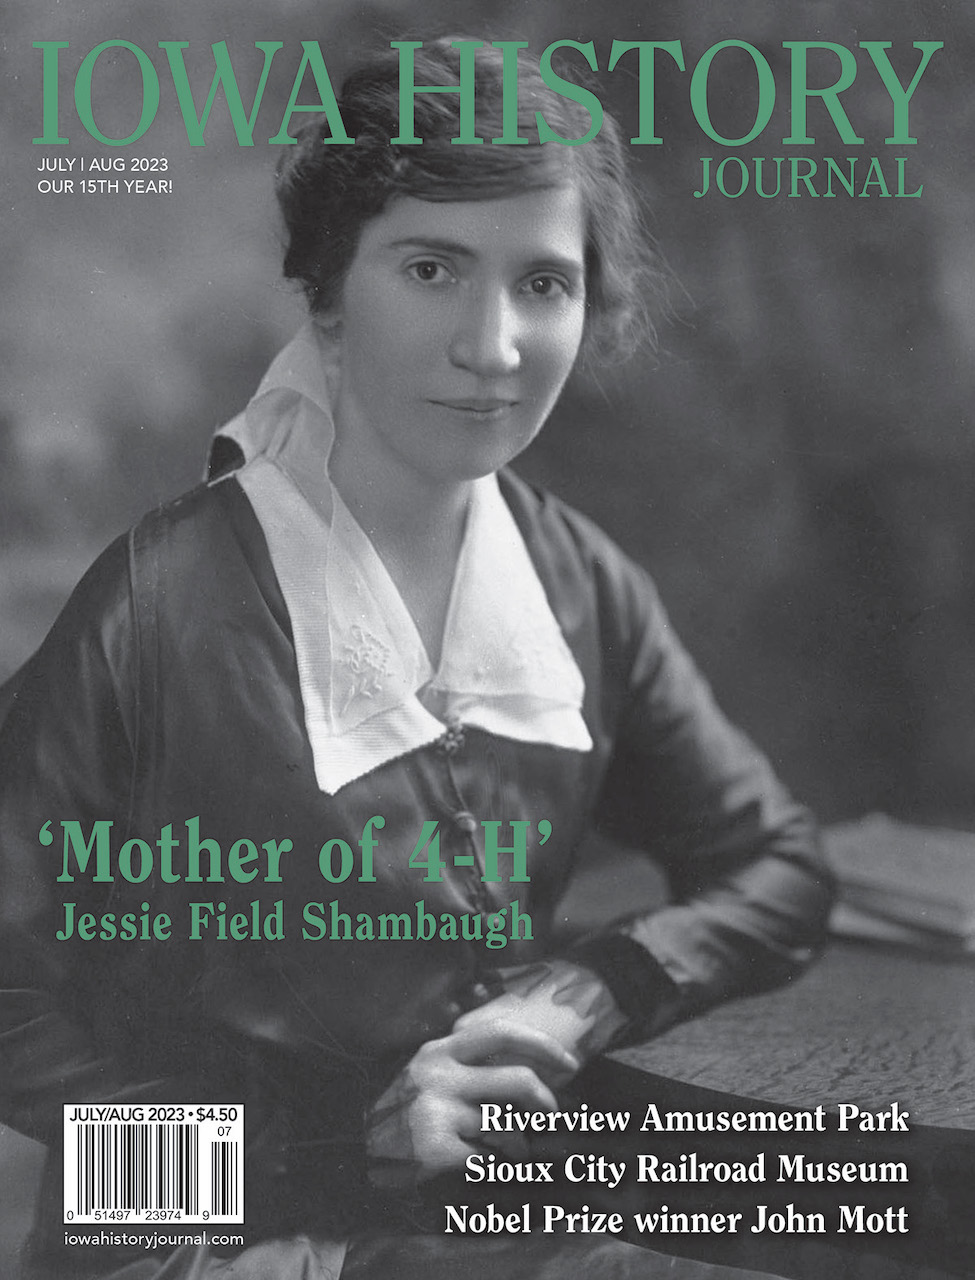 Volume 15, Issue 4 - Mother of 4-H